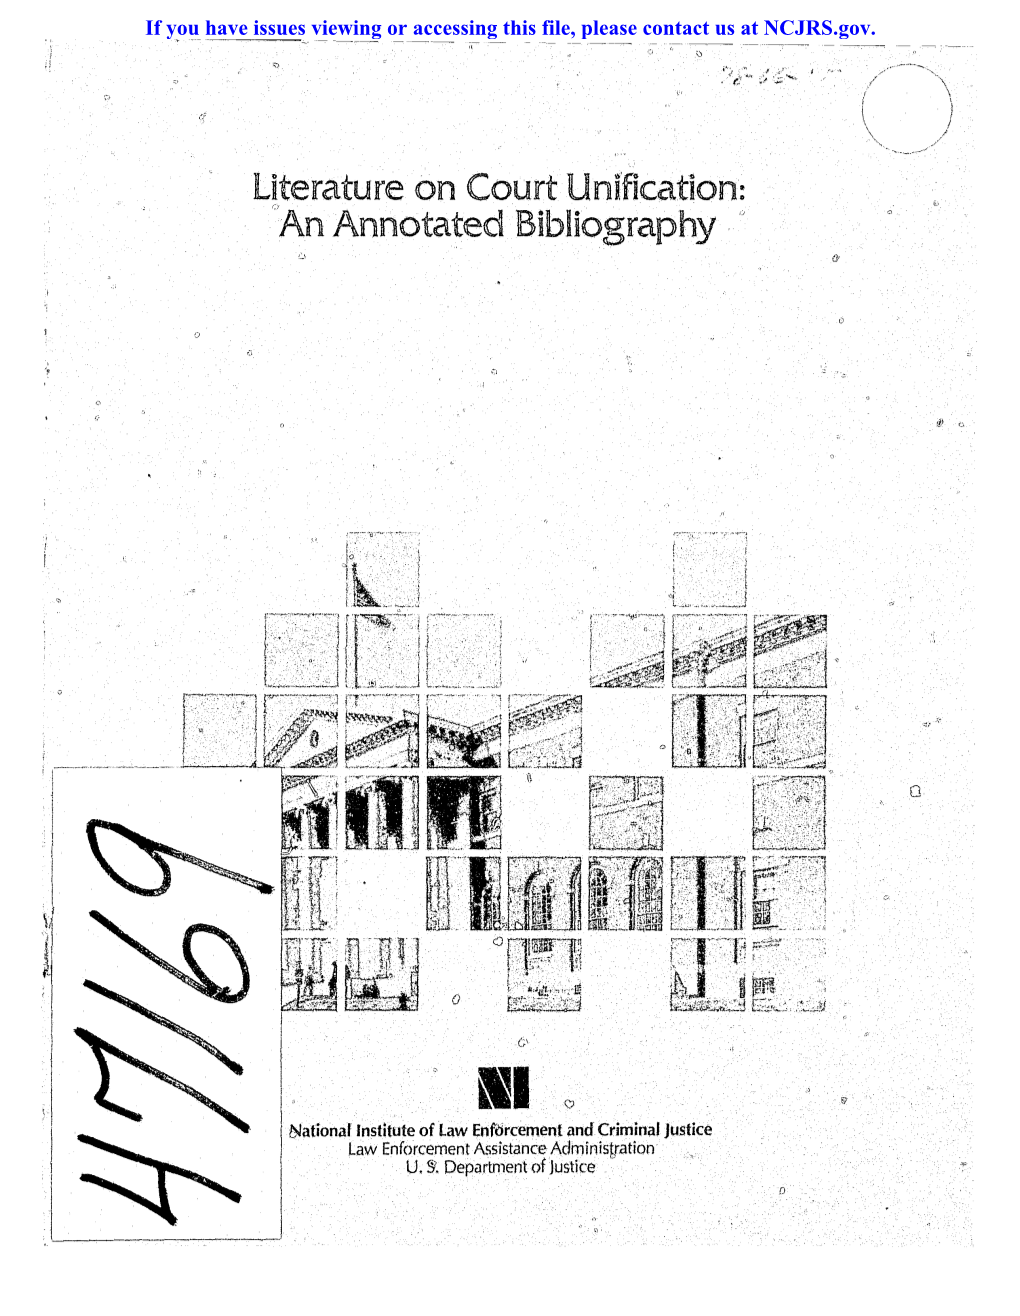 Literature on Court Unification: "An Annotated Bibliography